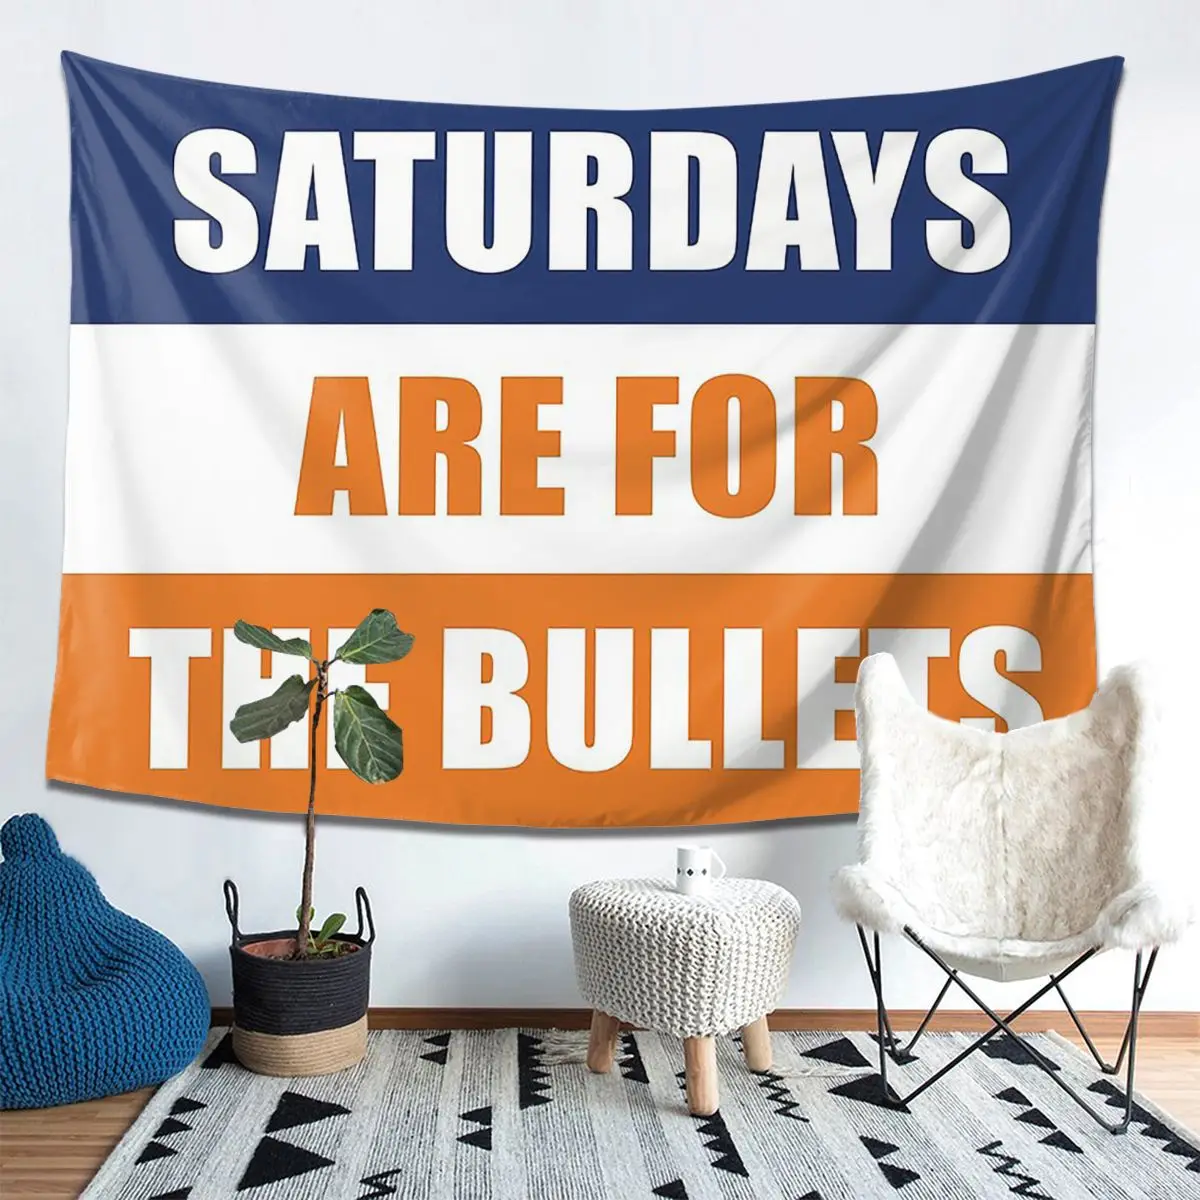 

Saturdays Are For The Bullets- Gettysburg College Home Decoration Tapestry Art Wall Hanging Tapestries for Living Room Bedroom